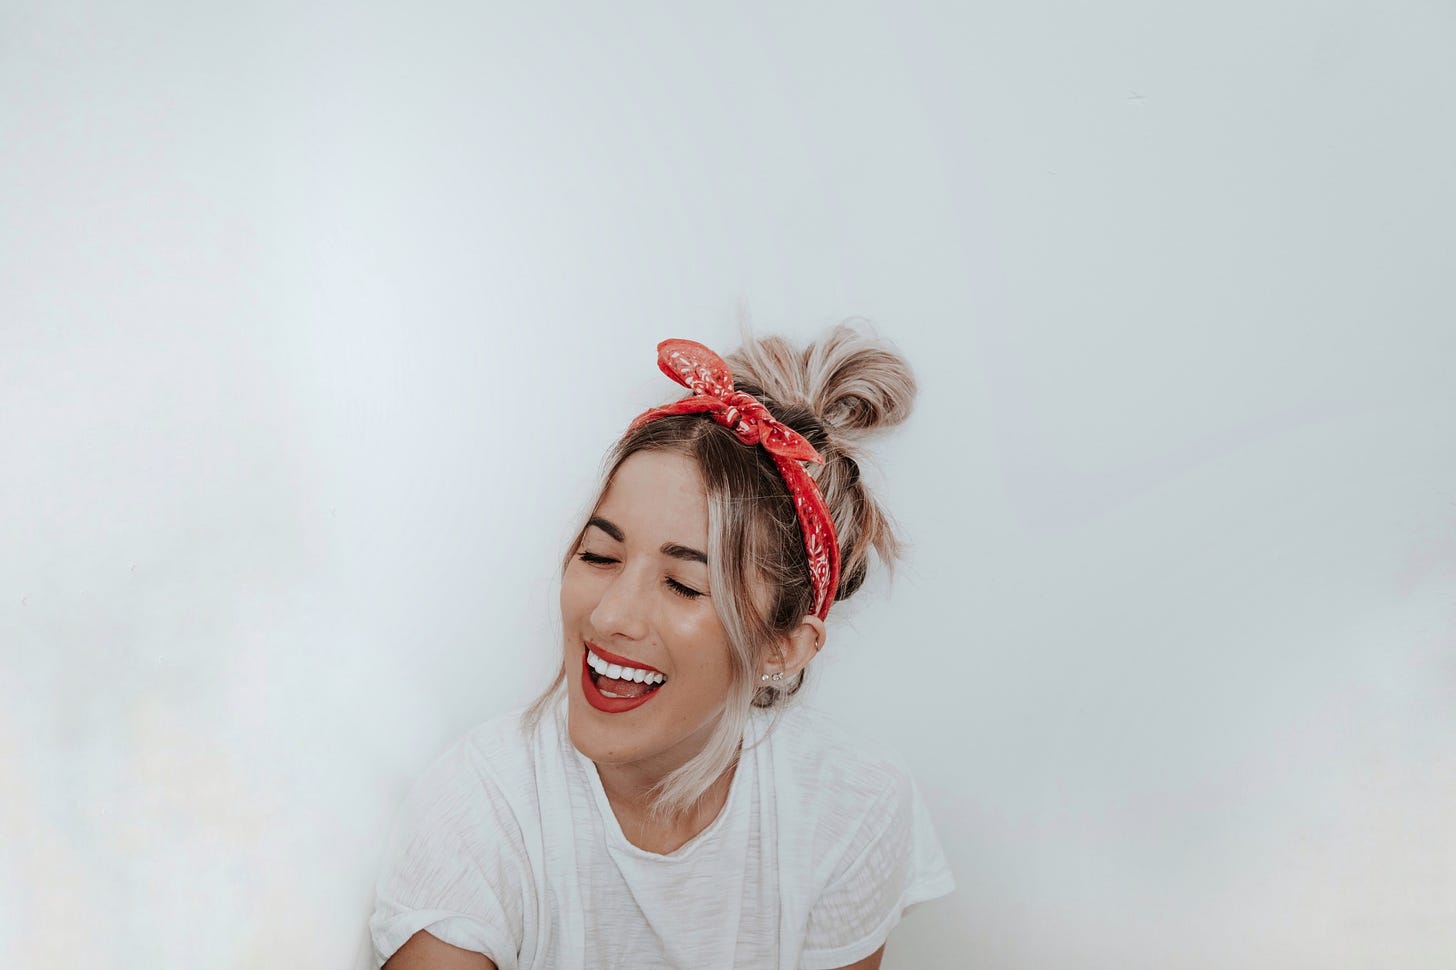 A woman in a red bandana and a white t-shirt smiles against a white background.